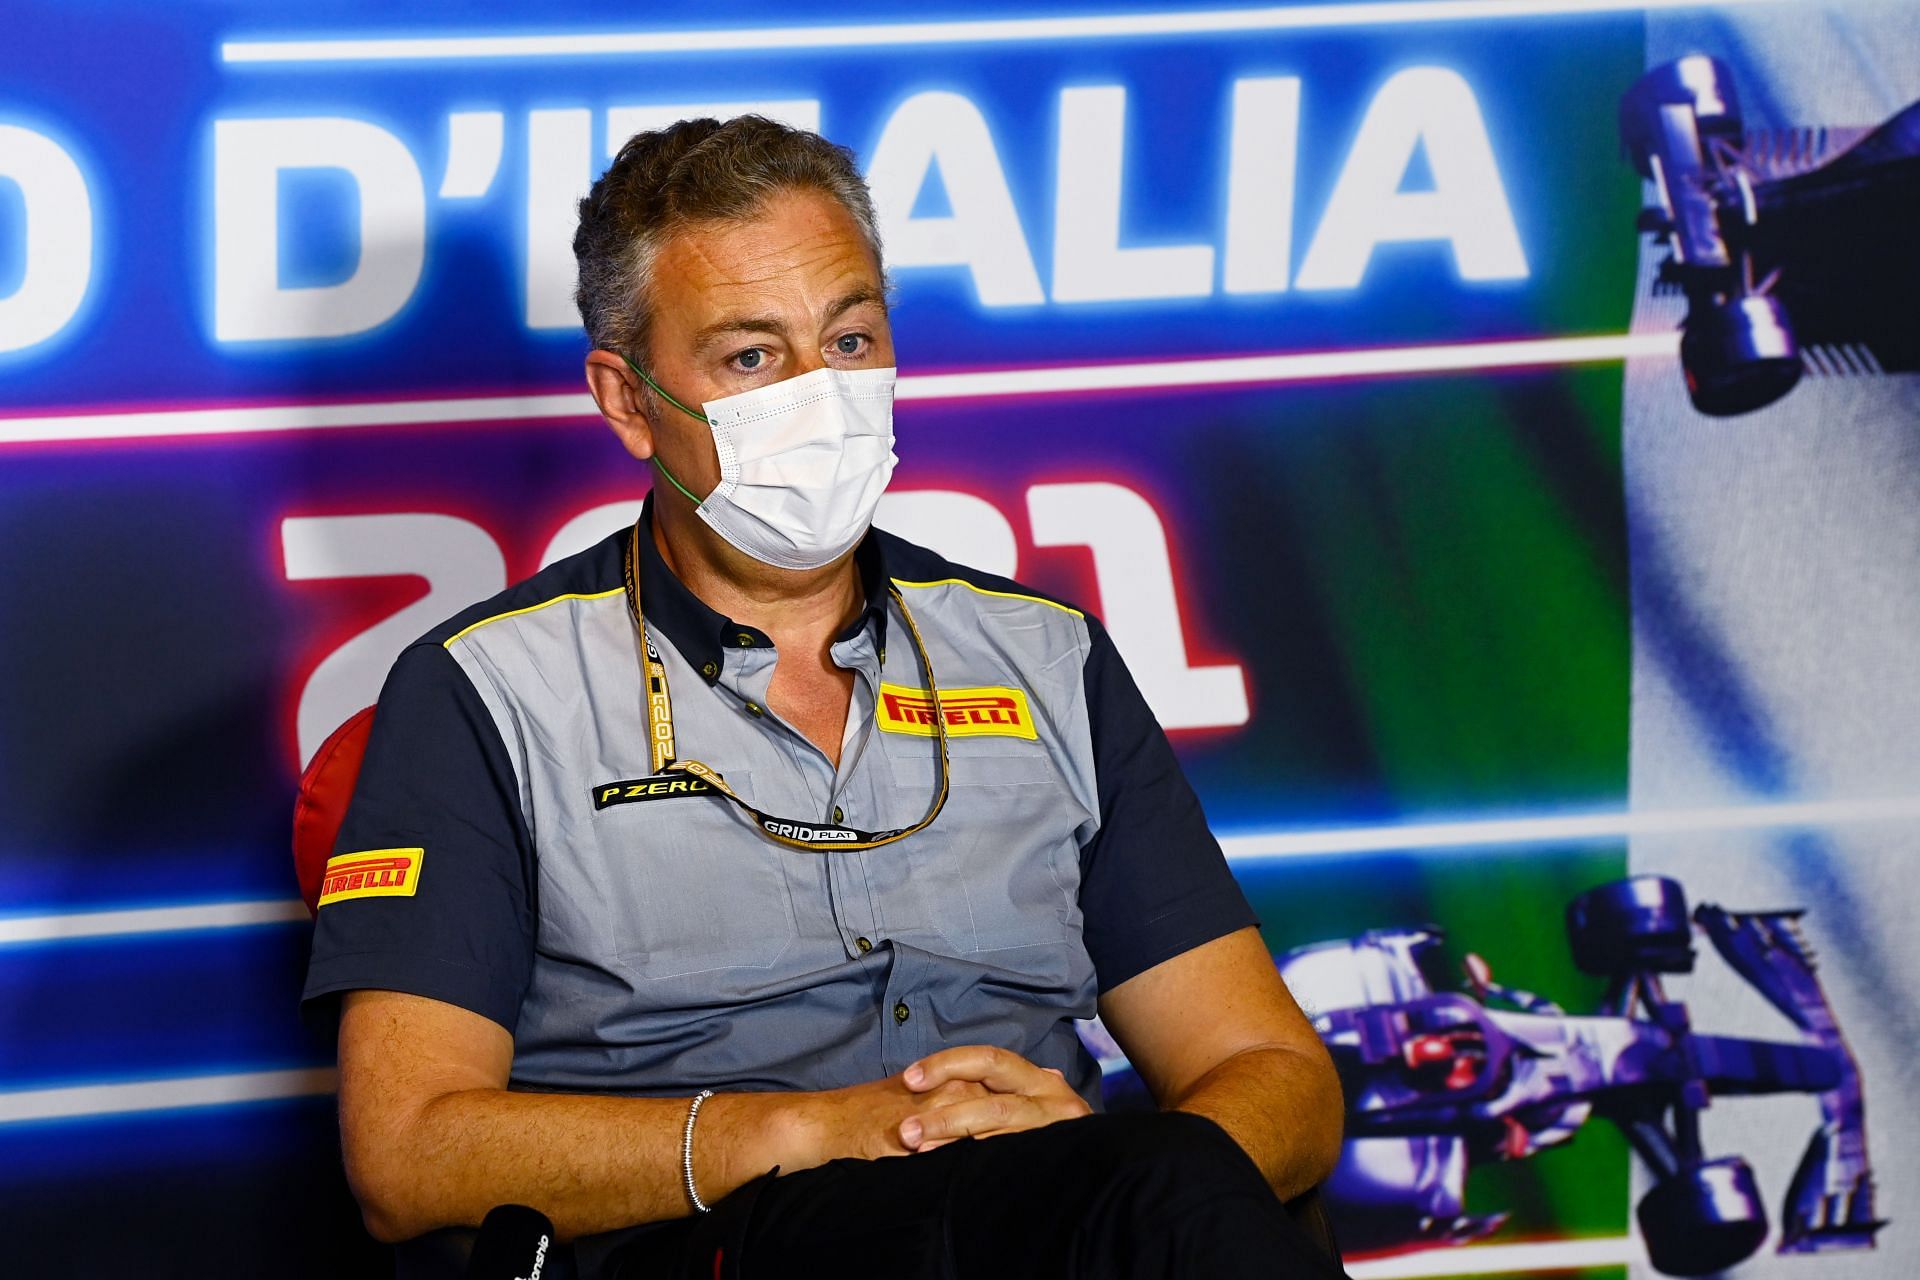 Pirelli F1 boss Mario Isola feels it is difficult o predict tire stratgeies for the 2022 season opener (Photo by Mark Sutton - Pool/Getty Images)